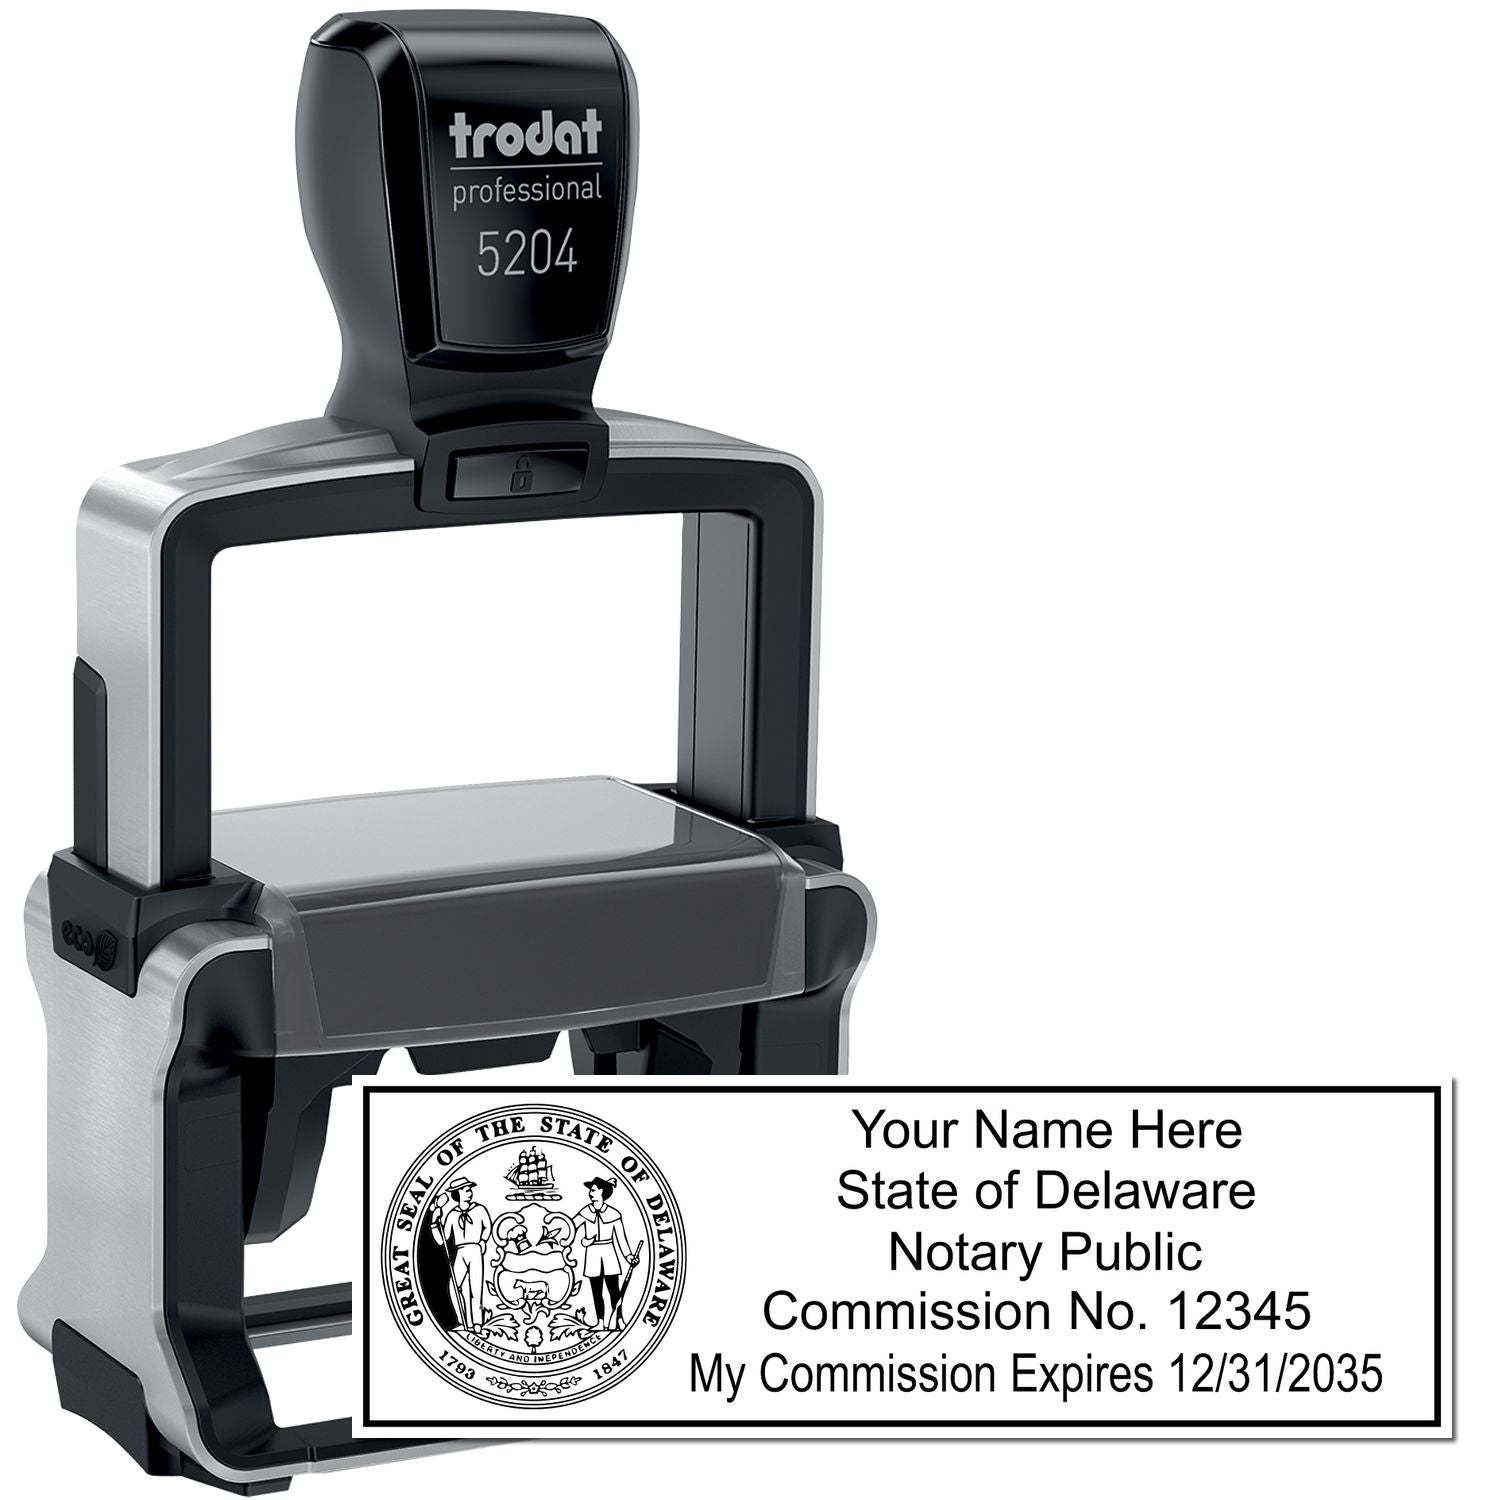 The main image for the Heavy-Duty Delaware Rectangular Notary Stamp depicting a sample of the imprint and electronic files